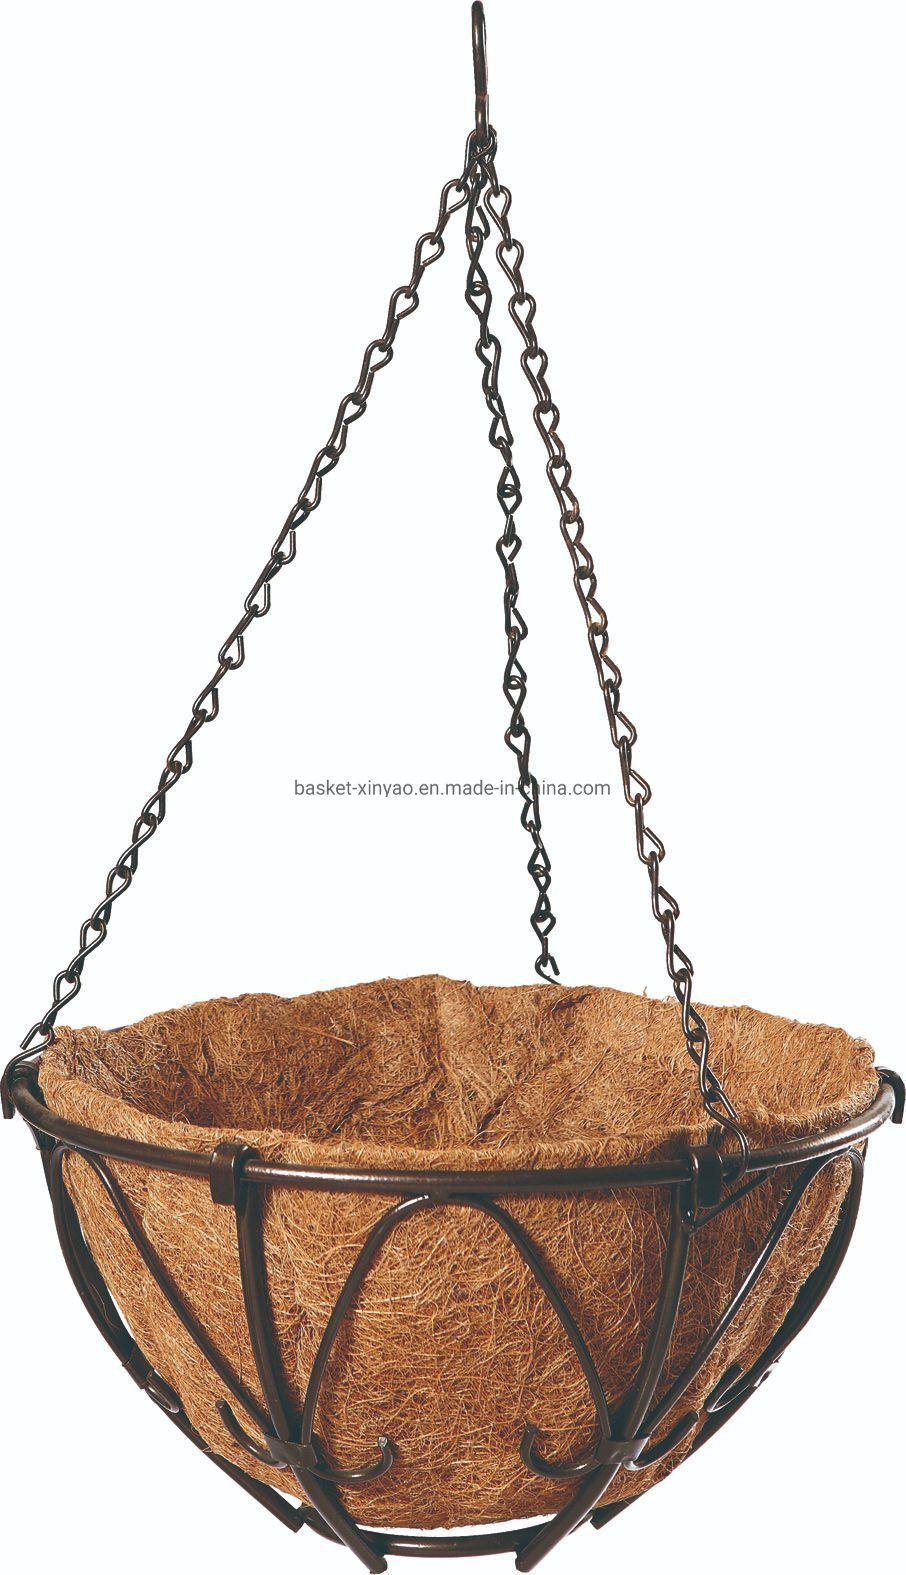 V Shape Metal Hanging Basket for Flowers Iron Wire Planter with Coco Liner and Chain (2 sizes)